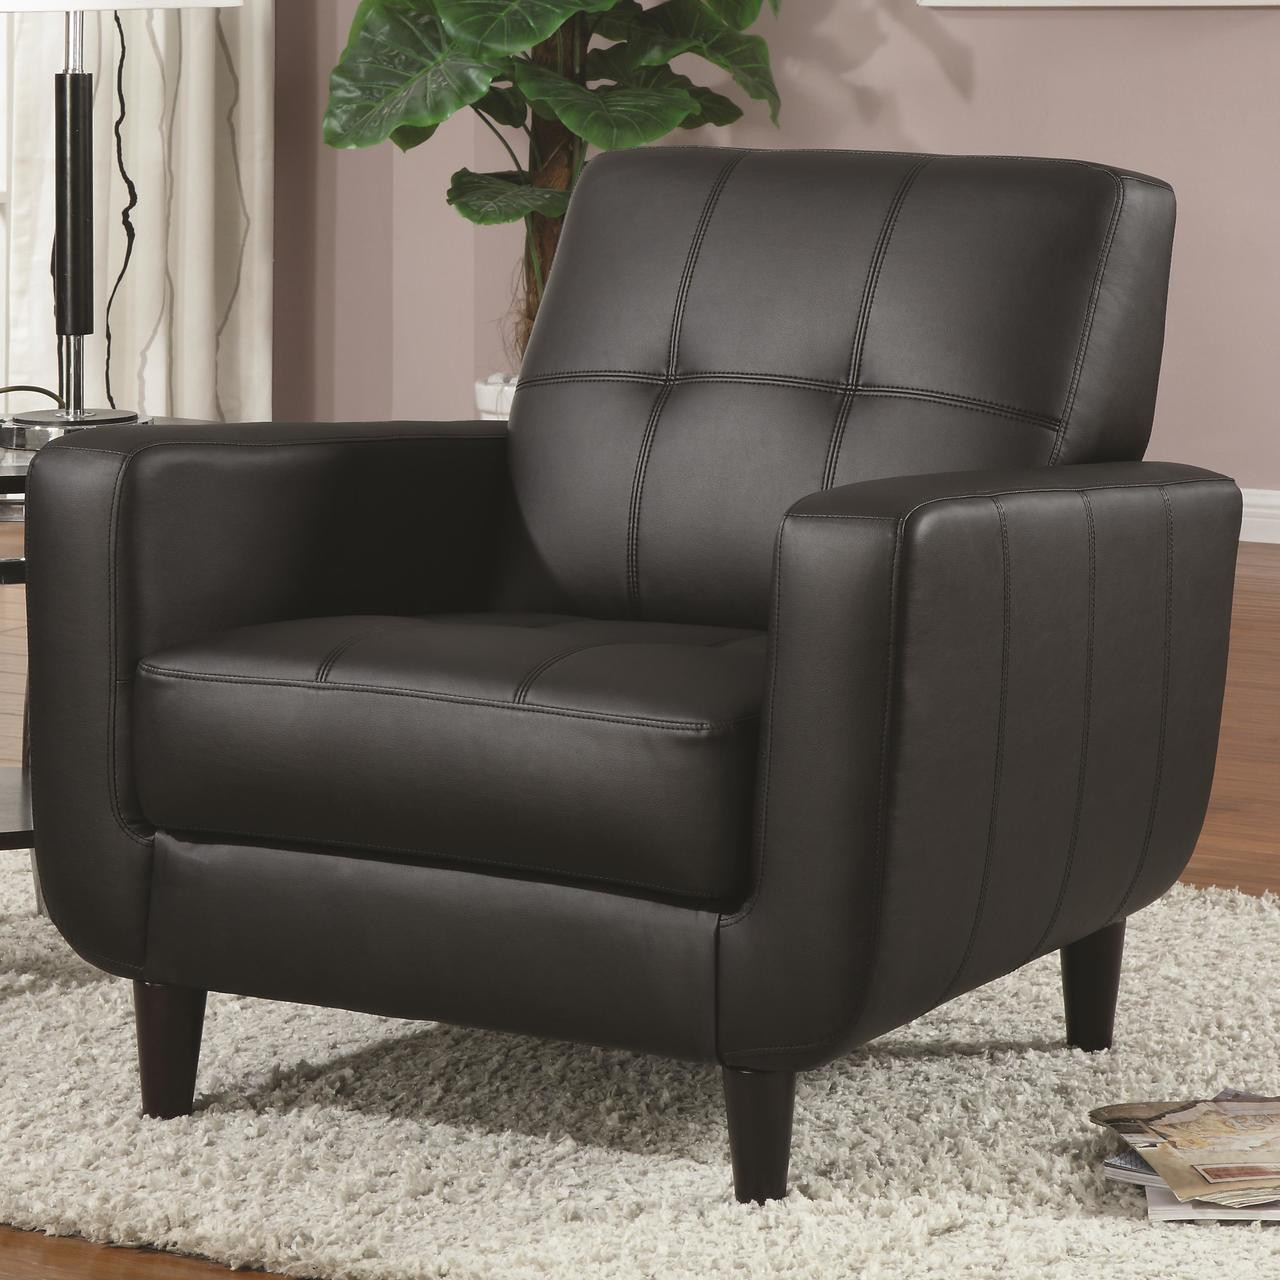 Coaster LeAndrew Round Wood Accent Chair in Black